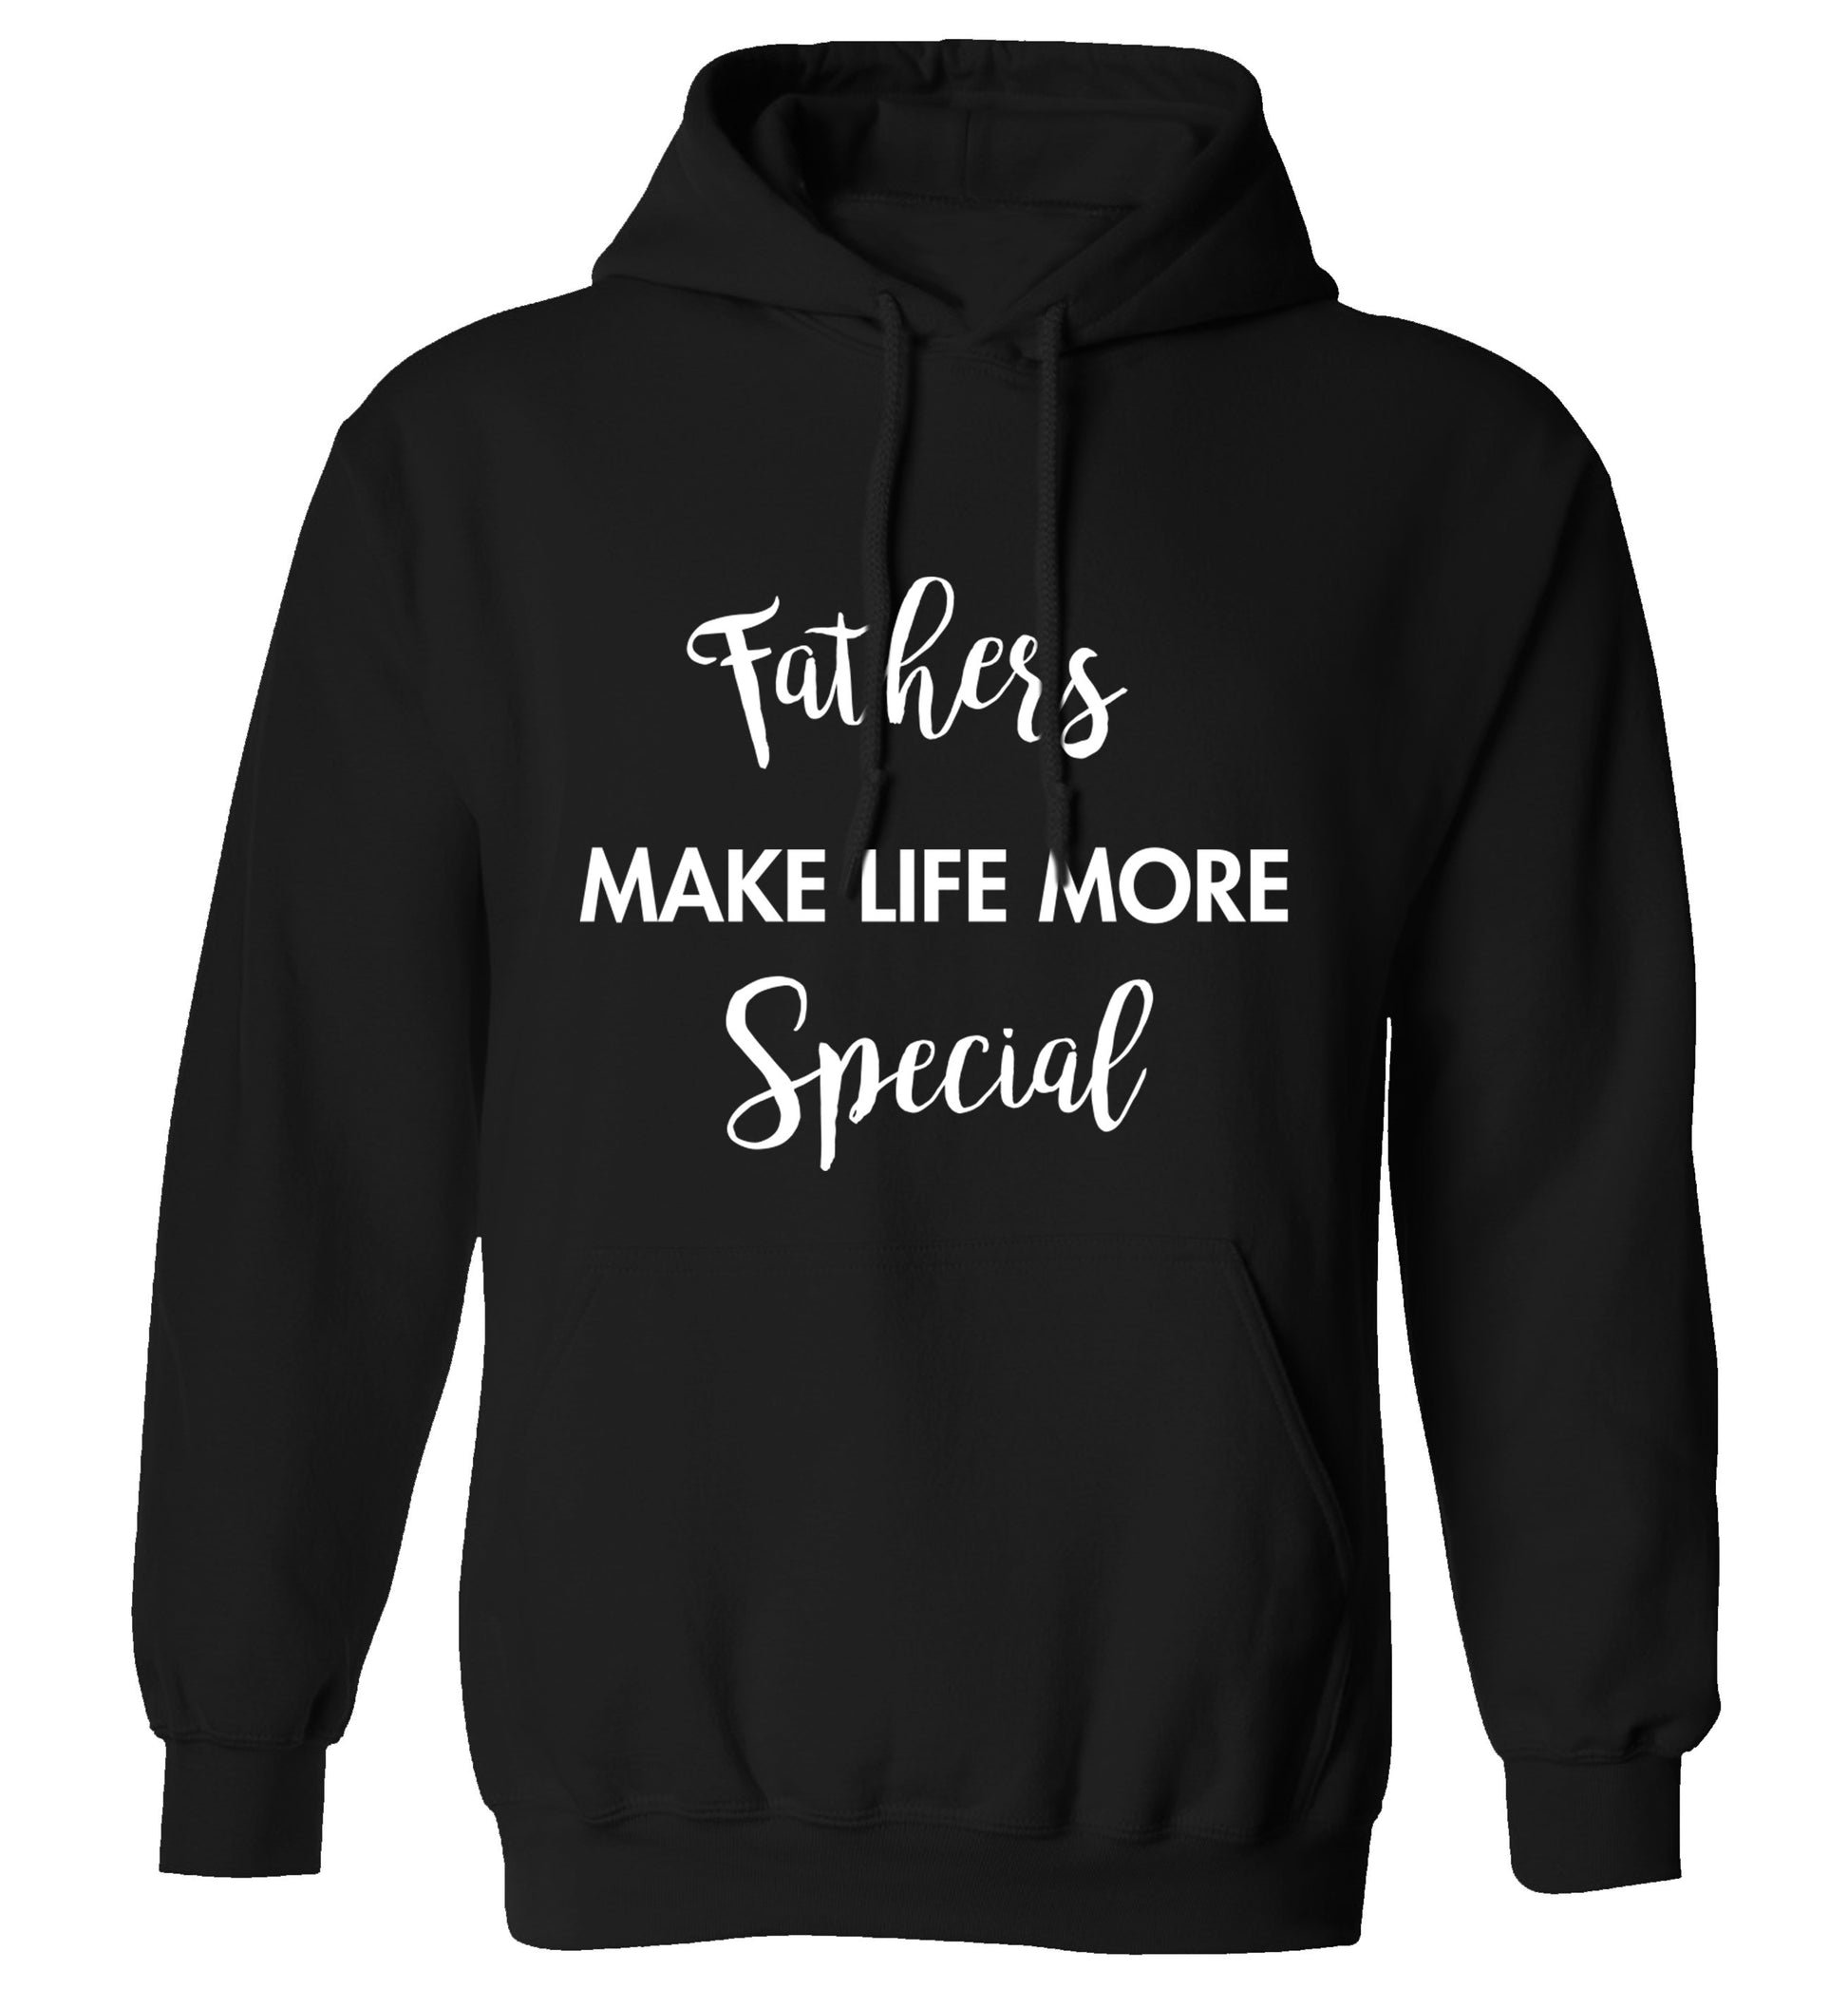 Fathers make life more special adults unisex black hoodie 2XL